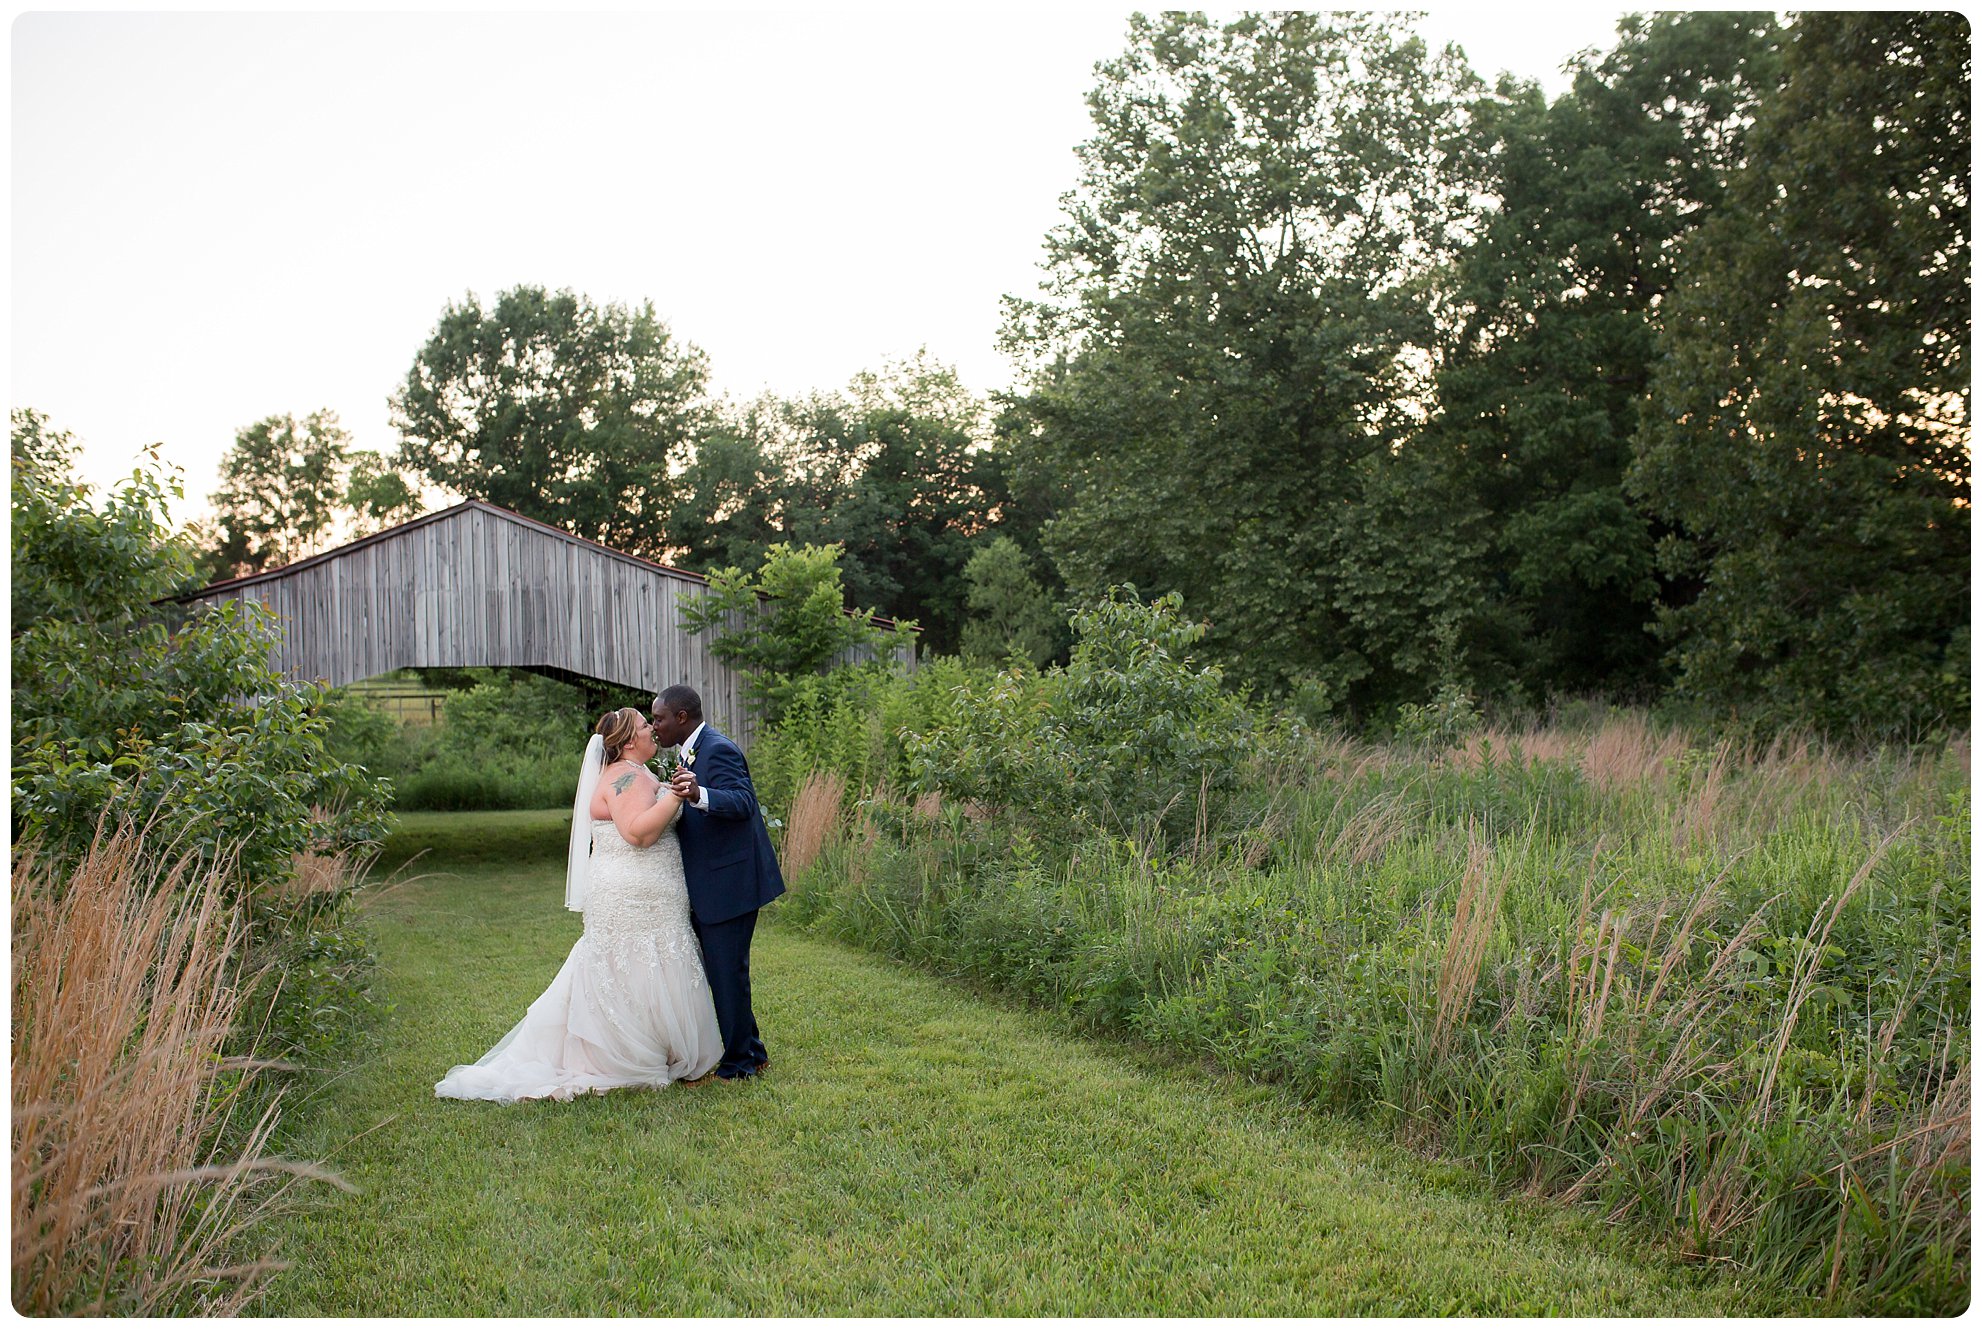 Nashville wedding at Iriswoods, Southern Belles and Blooms, navy tuxedo, whimsical garden wedding, southern wedding, southern bride, nashville bride, melanie grady photography, the best nashville wedding photographer, interracial couple wedding, mt juliet, golden hour portraits